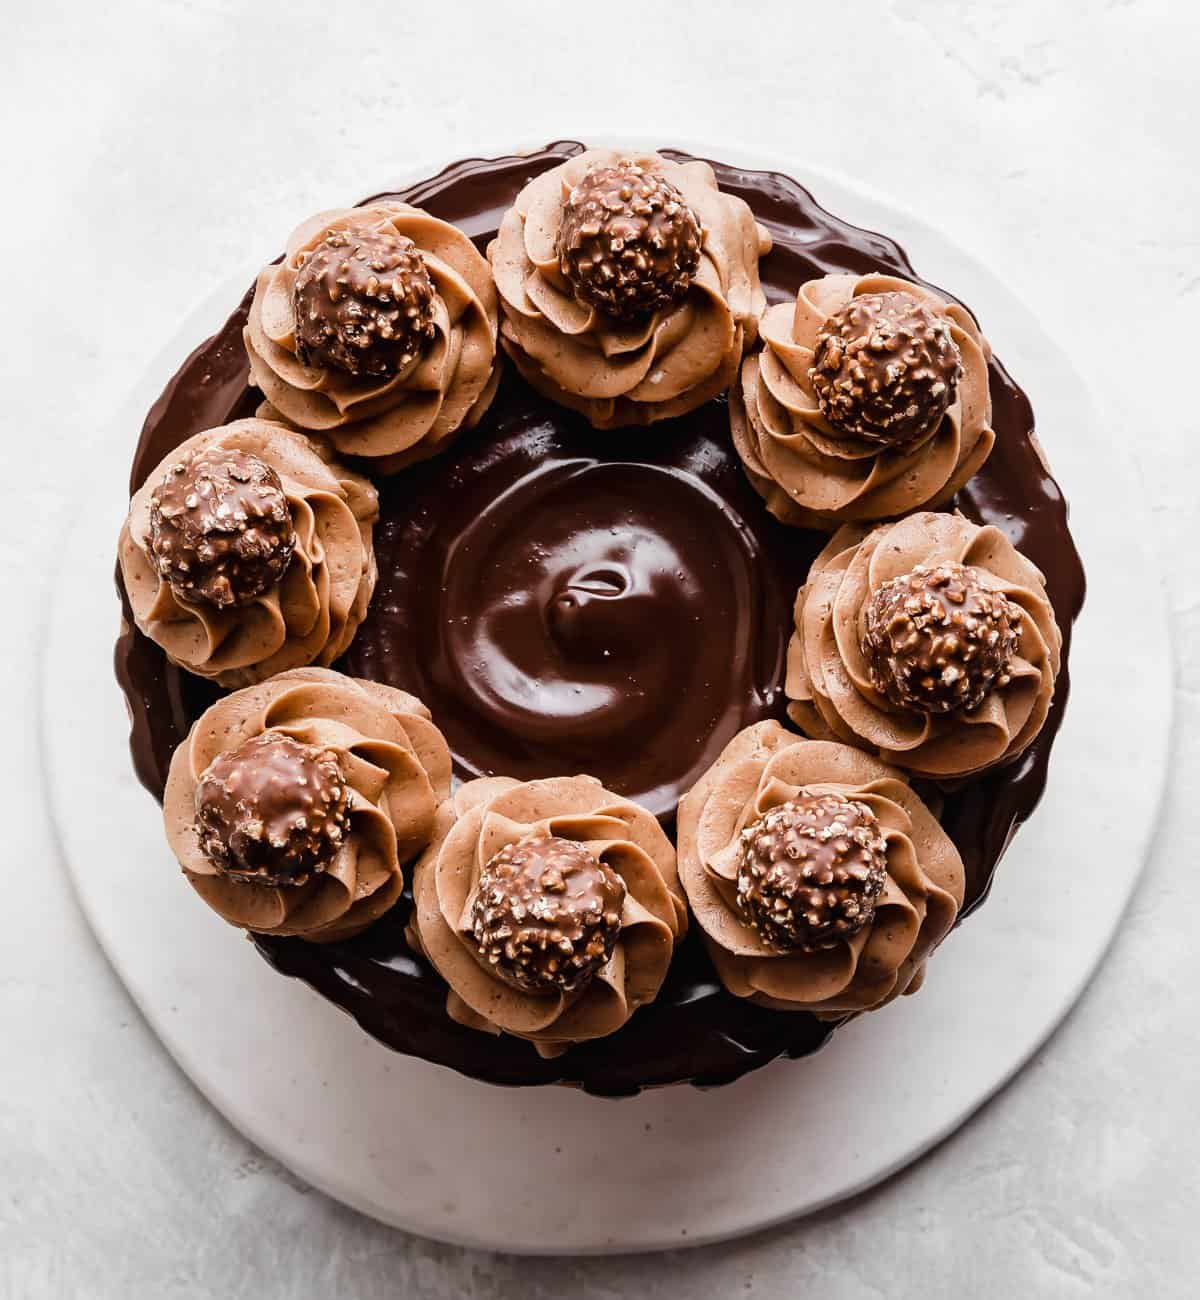 An overhead photo of a Ferrero Rocher Cake that's topped with a chocolate ganache and swirls of chocolate frosting garnished with unwrapped Ferrero Rocher candies.